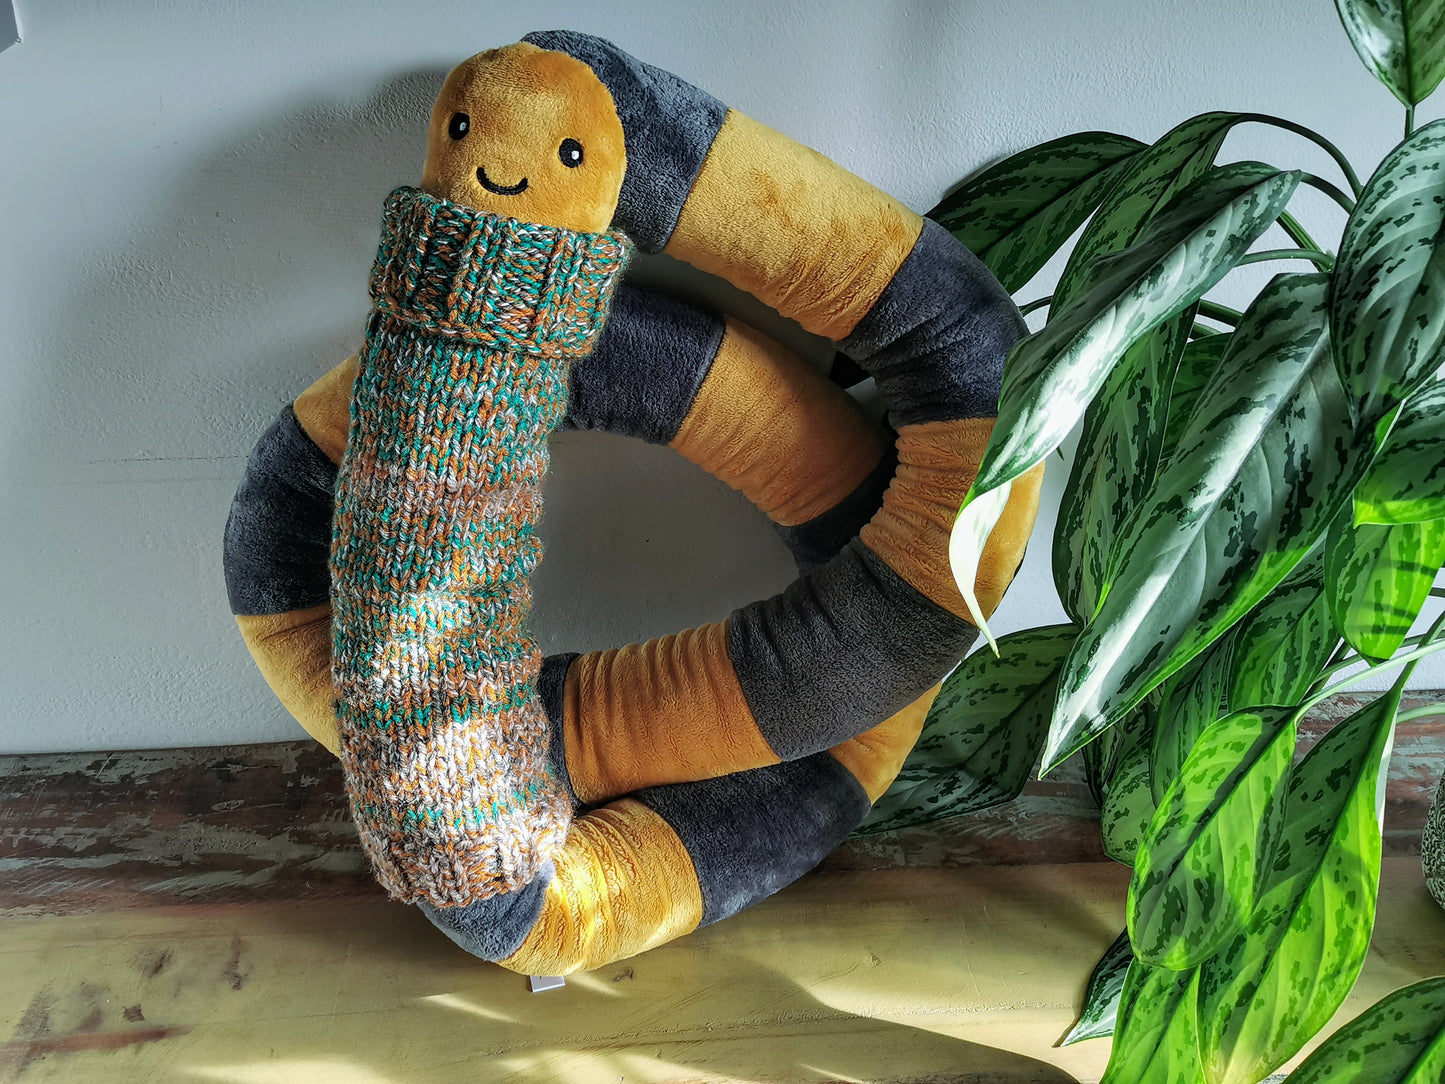 Giant Mustard EarthWorm Plush with knitted turtleneck, funny fantasy odd creature, Mustard-Grey, 200cm